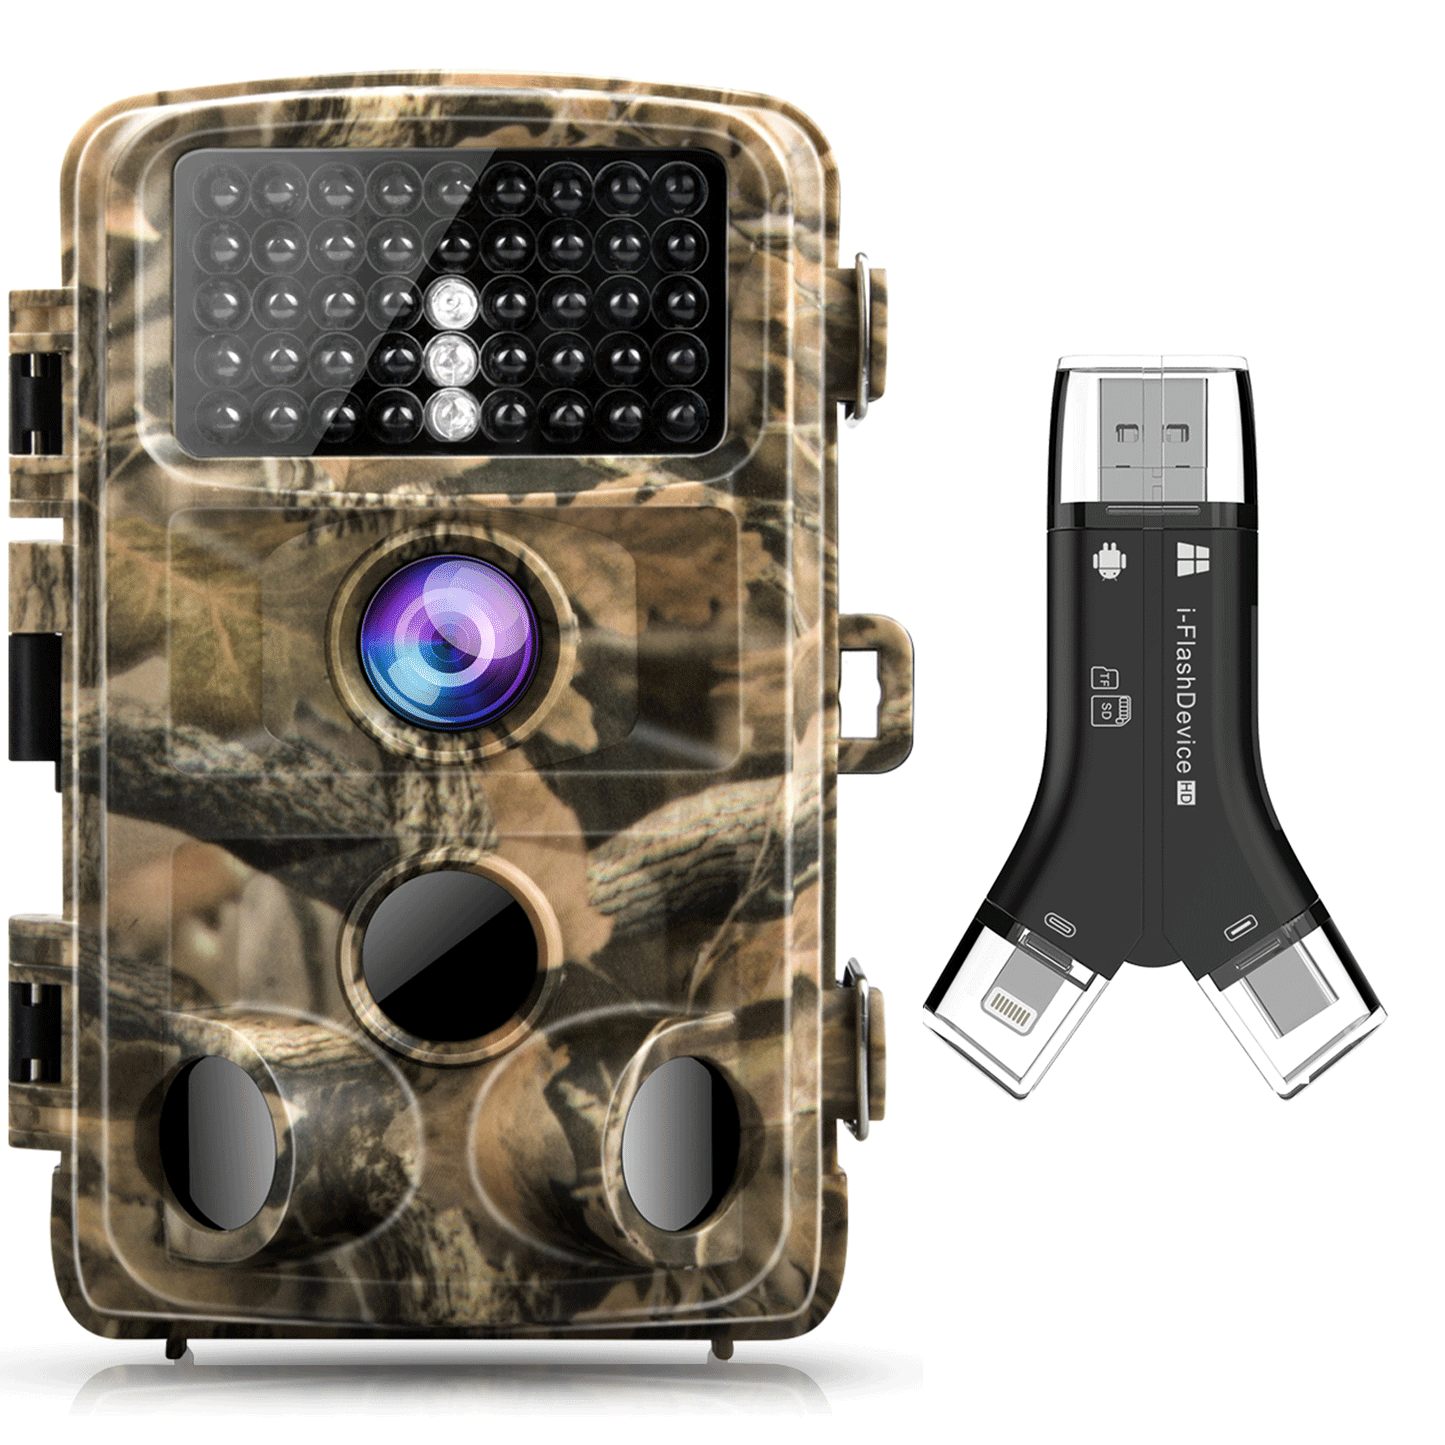 CAMPARK 4K 20MP Trail Camera with Memory SD Card Reader Game Camera Deer Hunting Infrared Night Vision Waterproof 42 LEDs Outdoor Wildlife Trail Cam 2.4"LCD